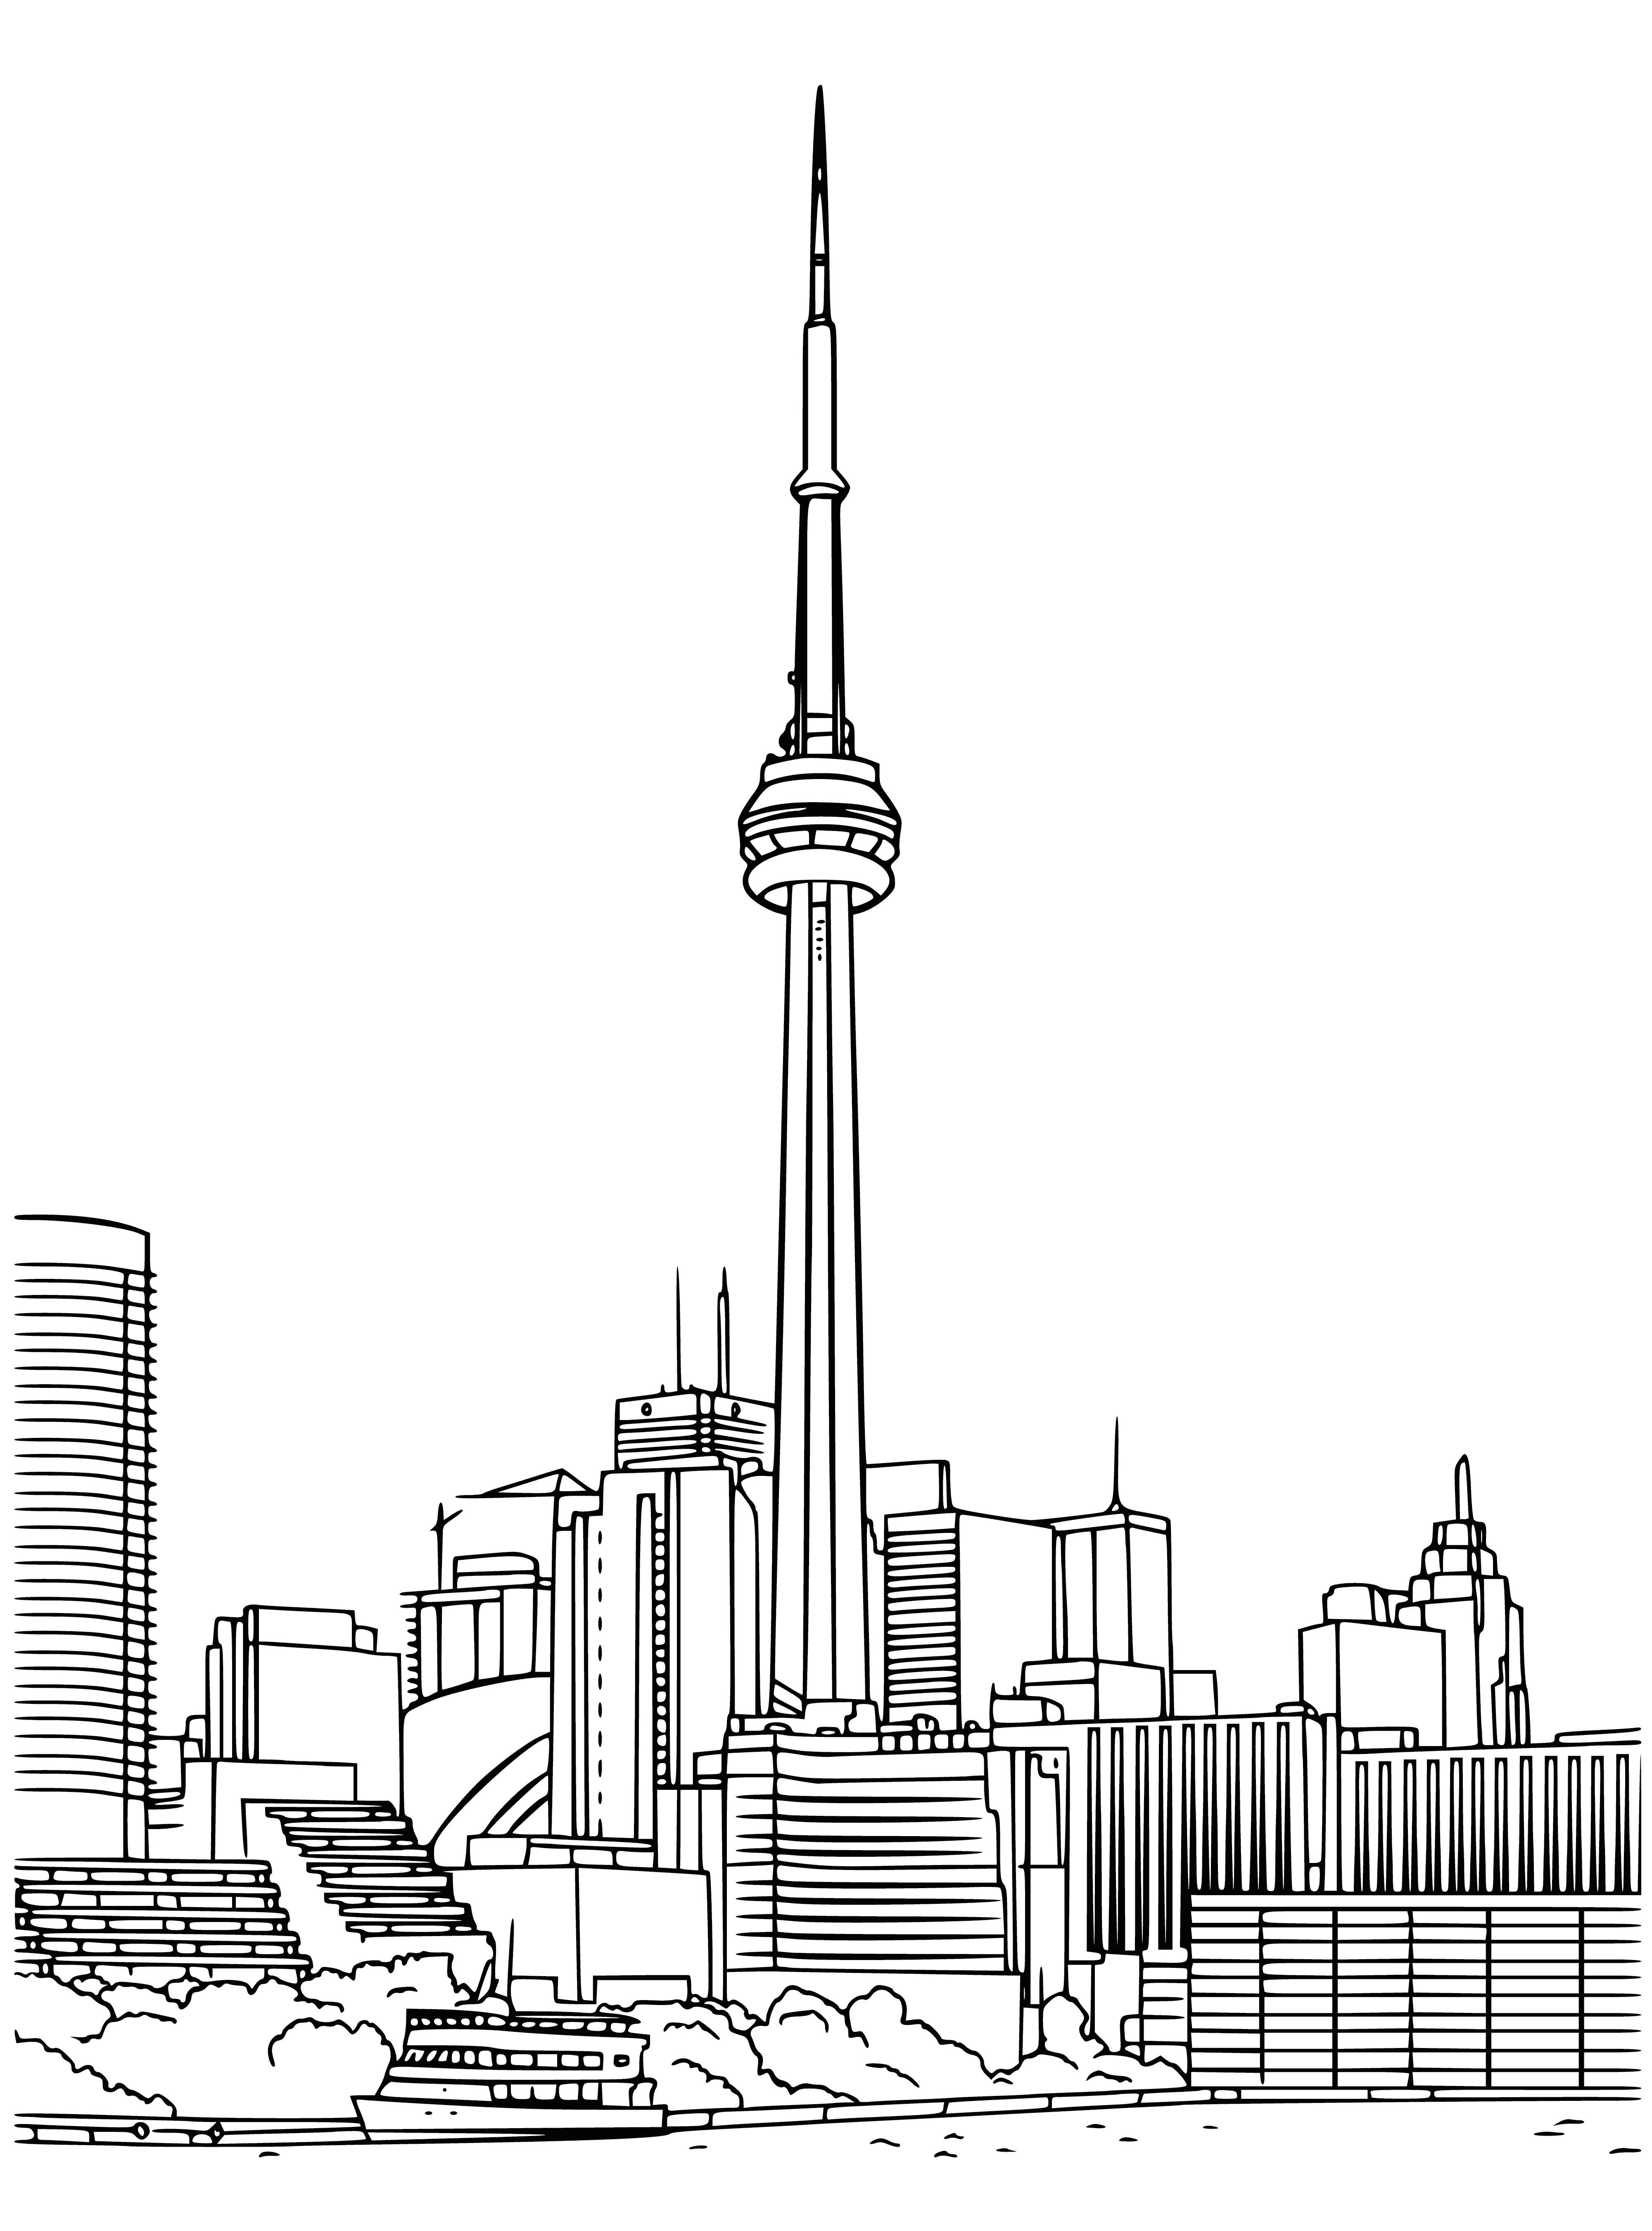 coloring page: Toronto's iconic CN Tower sits in the center of a coloring page, a popular tourist destination. The city skyline with skyscrapers also in view. Take a trip up the tower for 360-degree views of the city.